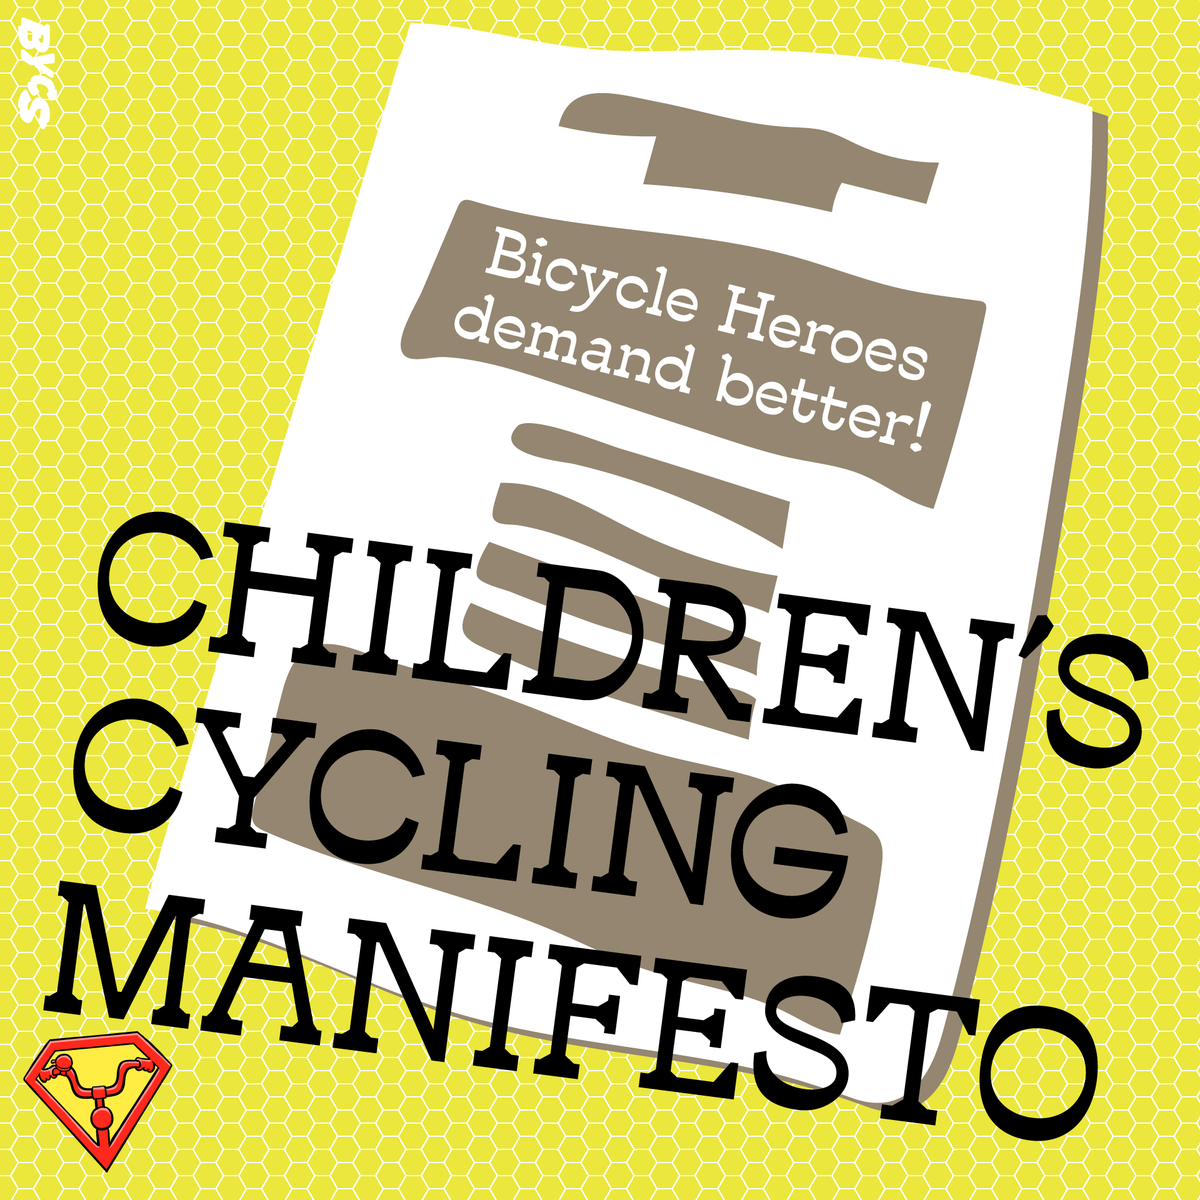 Dutch kids are happy! Encouraging cycling has led 66% of Dutch children to walk or bike to school, contributing to happier and healthier urban lifestyles. Read our #ChildrensCyclingManifesto to find out more: bycs.org/childrensmanif…